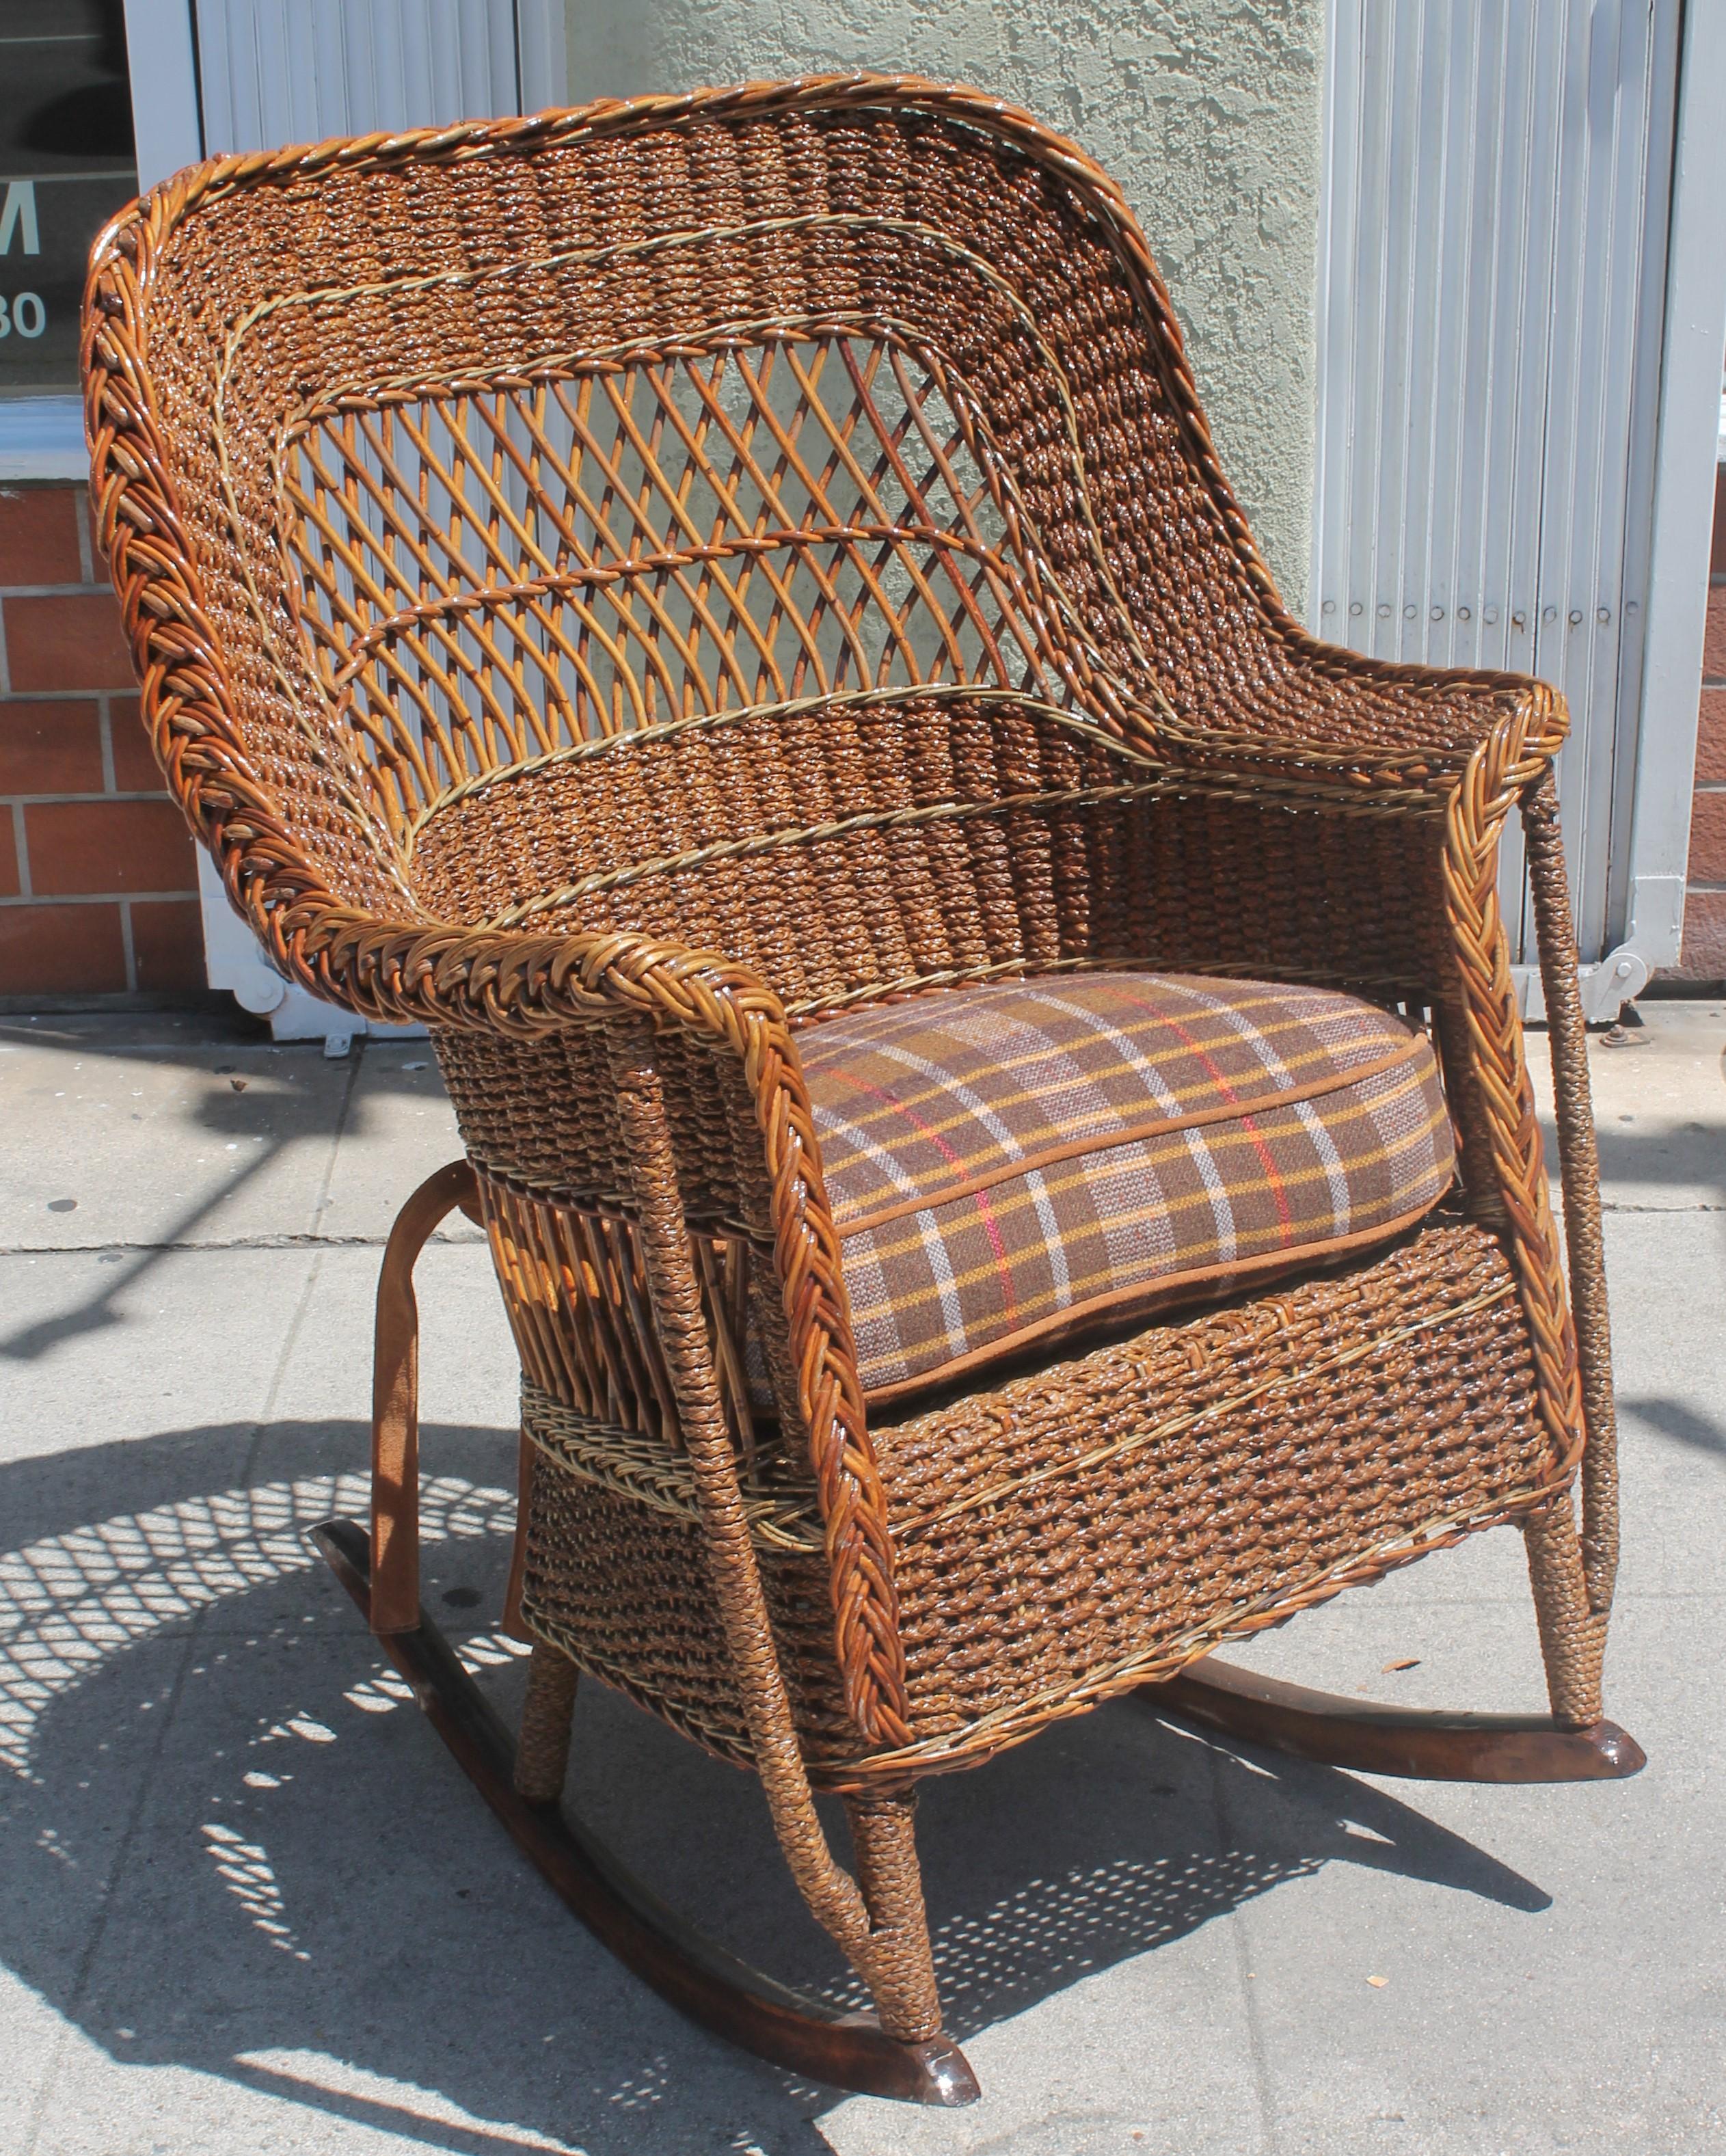 This amazing large wicker and sea grass rocking chair is from the early 20th century and in fantastic condition. It comes with a cushion as well made from a vintage blanket.